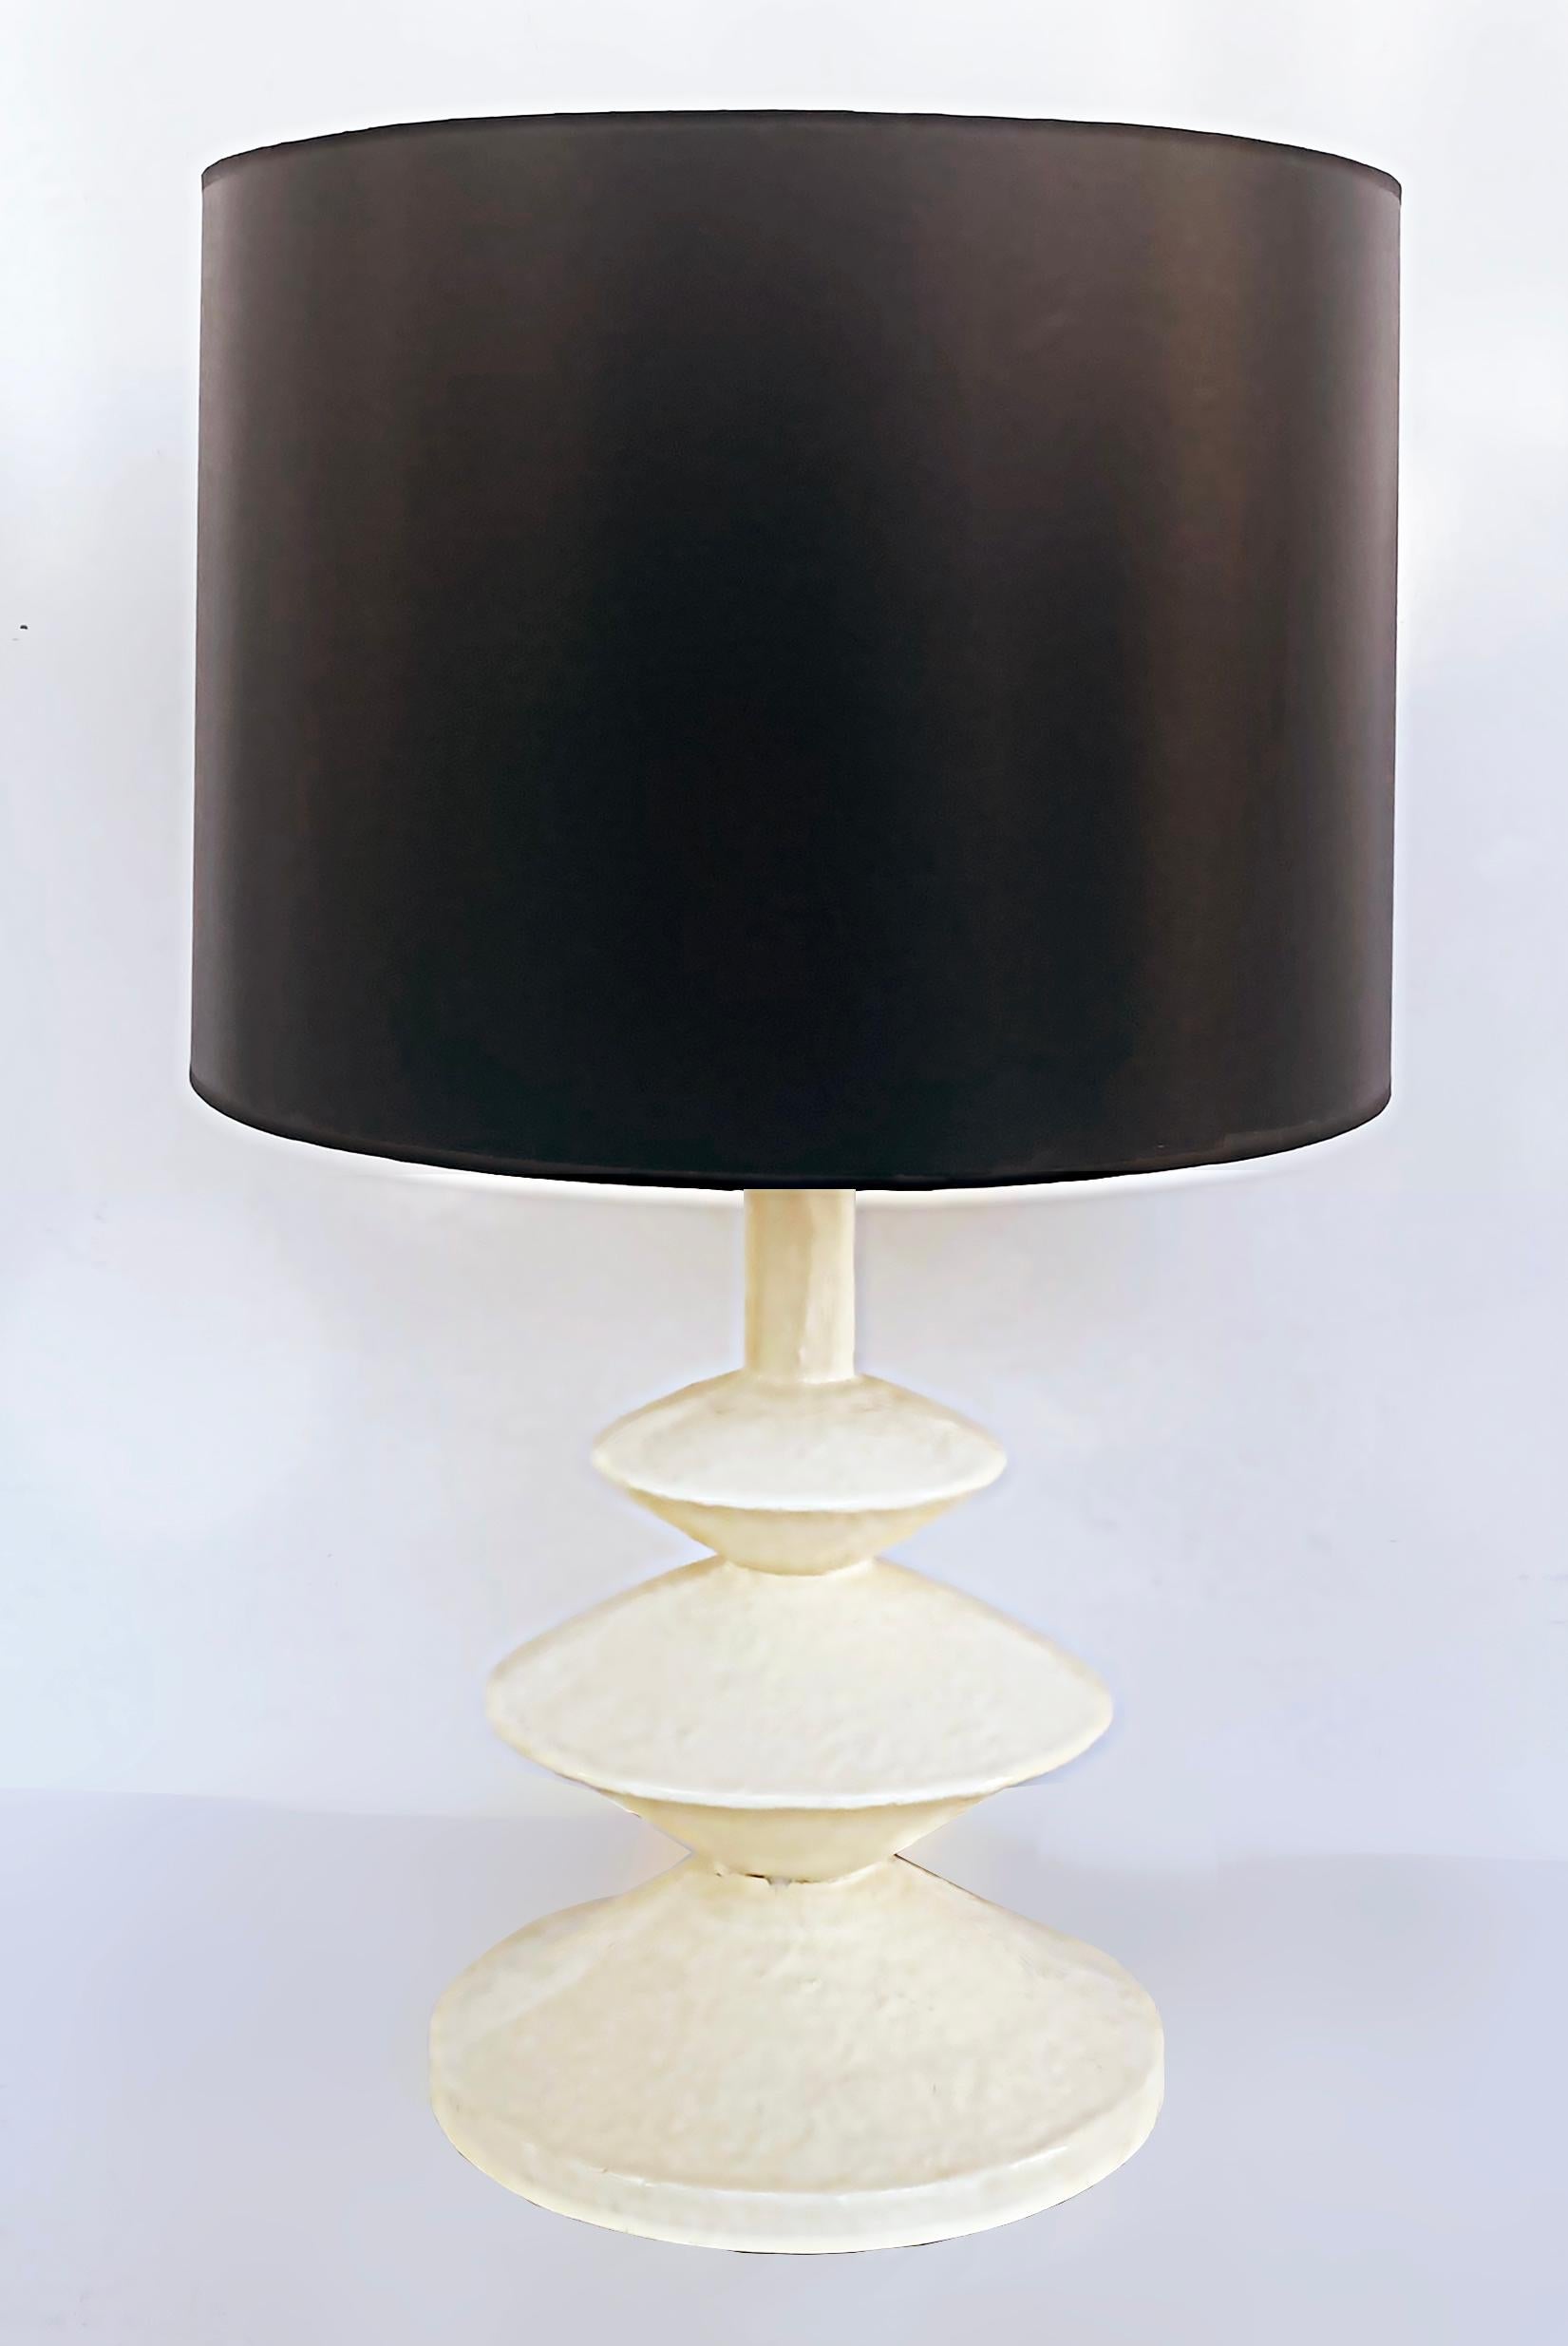 Jacques Grange Plaster Table Lamps Sirmos Attributed, Giacometti Manner

It is a fabulous early and highly sought-after pair of table lamps created by Jacques Grange after a design by Giacometti and attributed to the American manufacturer Sirmos.